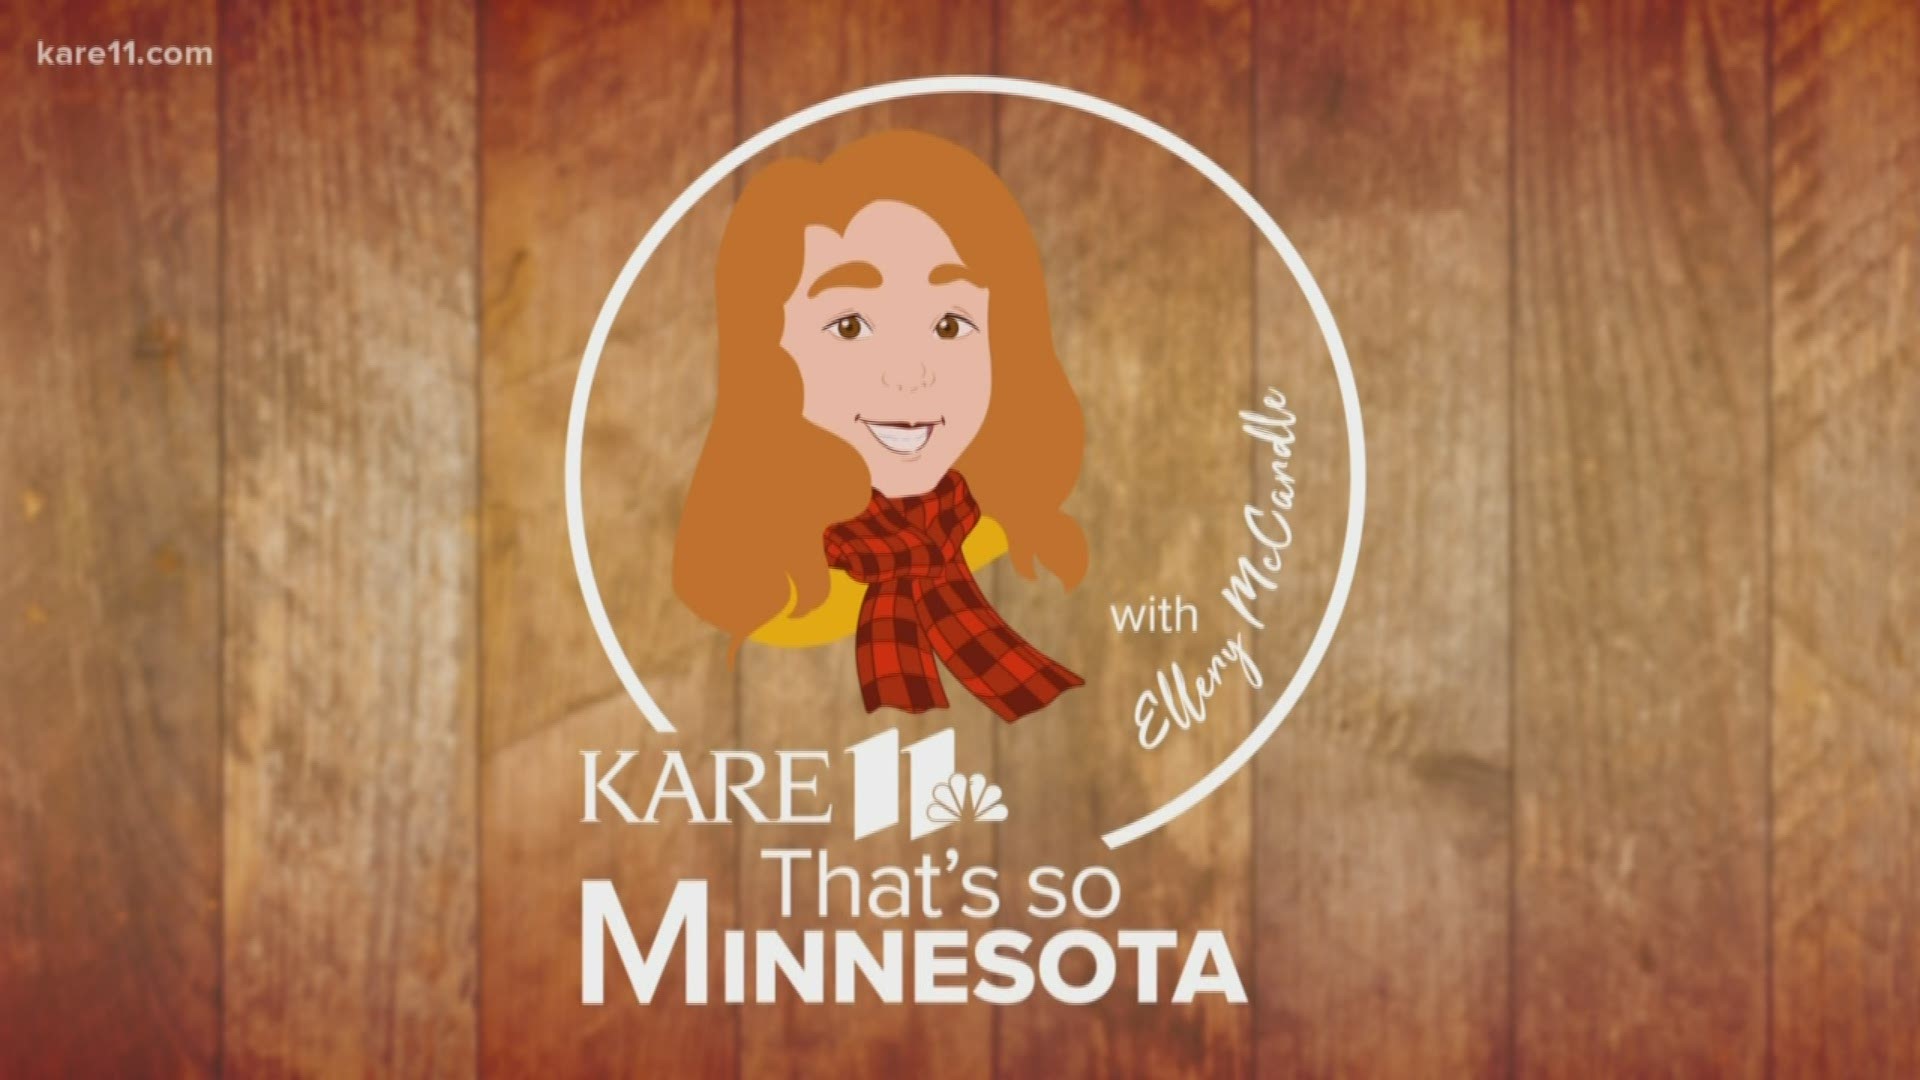 Episodes about the life, language and love of Minnesota will drop every Tuesday.